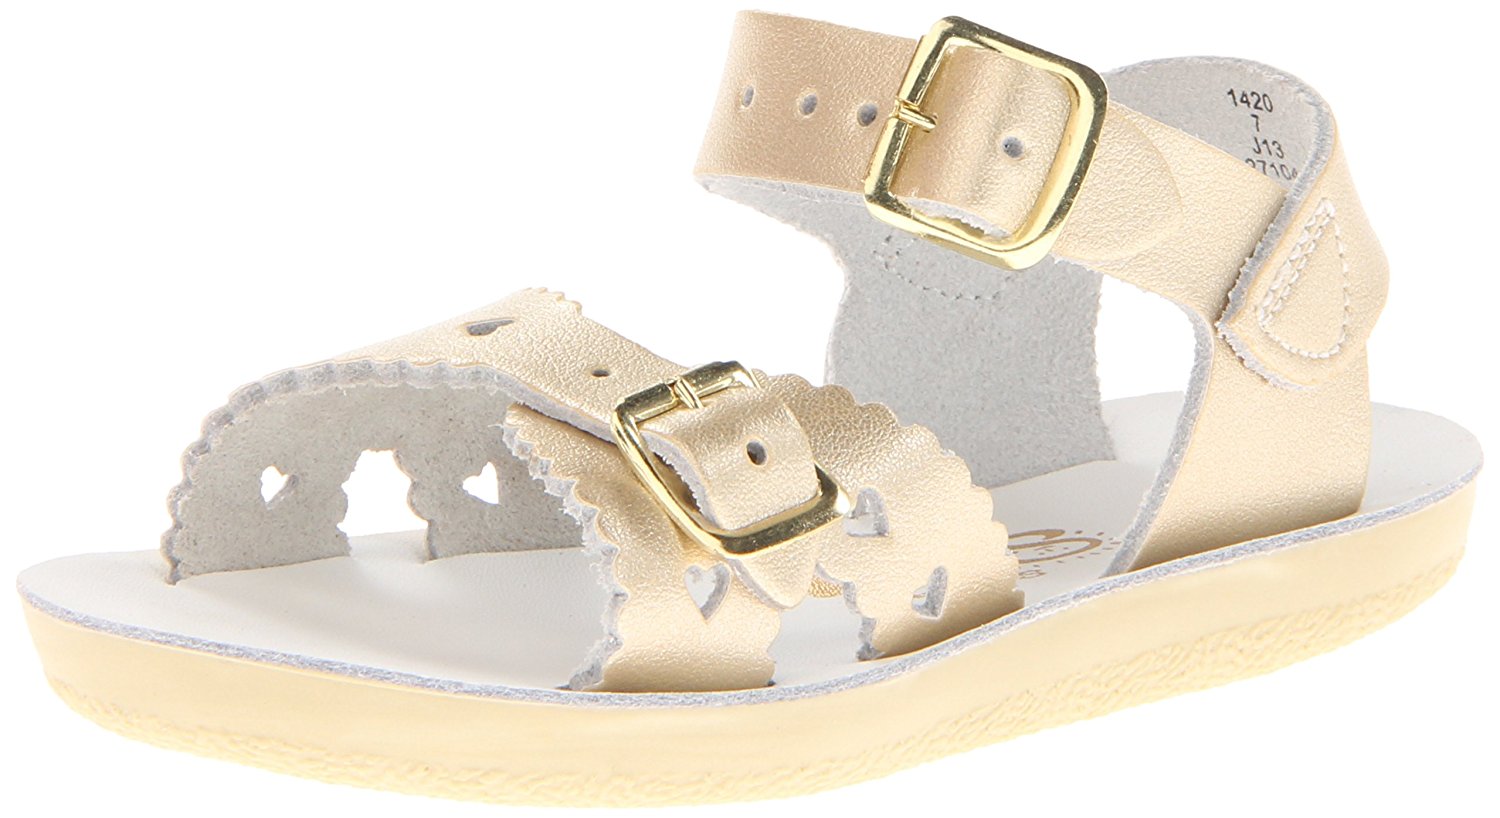 Salt Water Sandals by Hoy Sweetheart - Gold - 8 Toddler